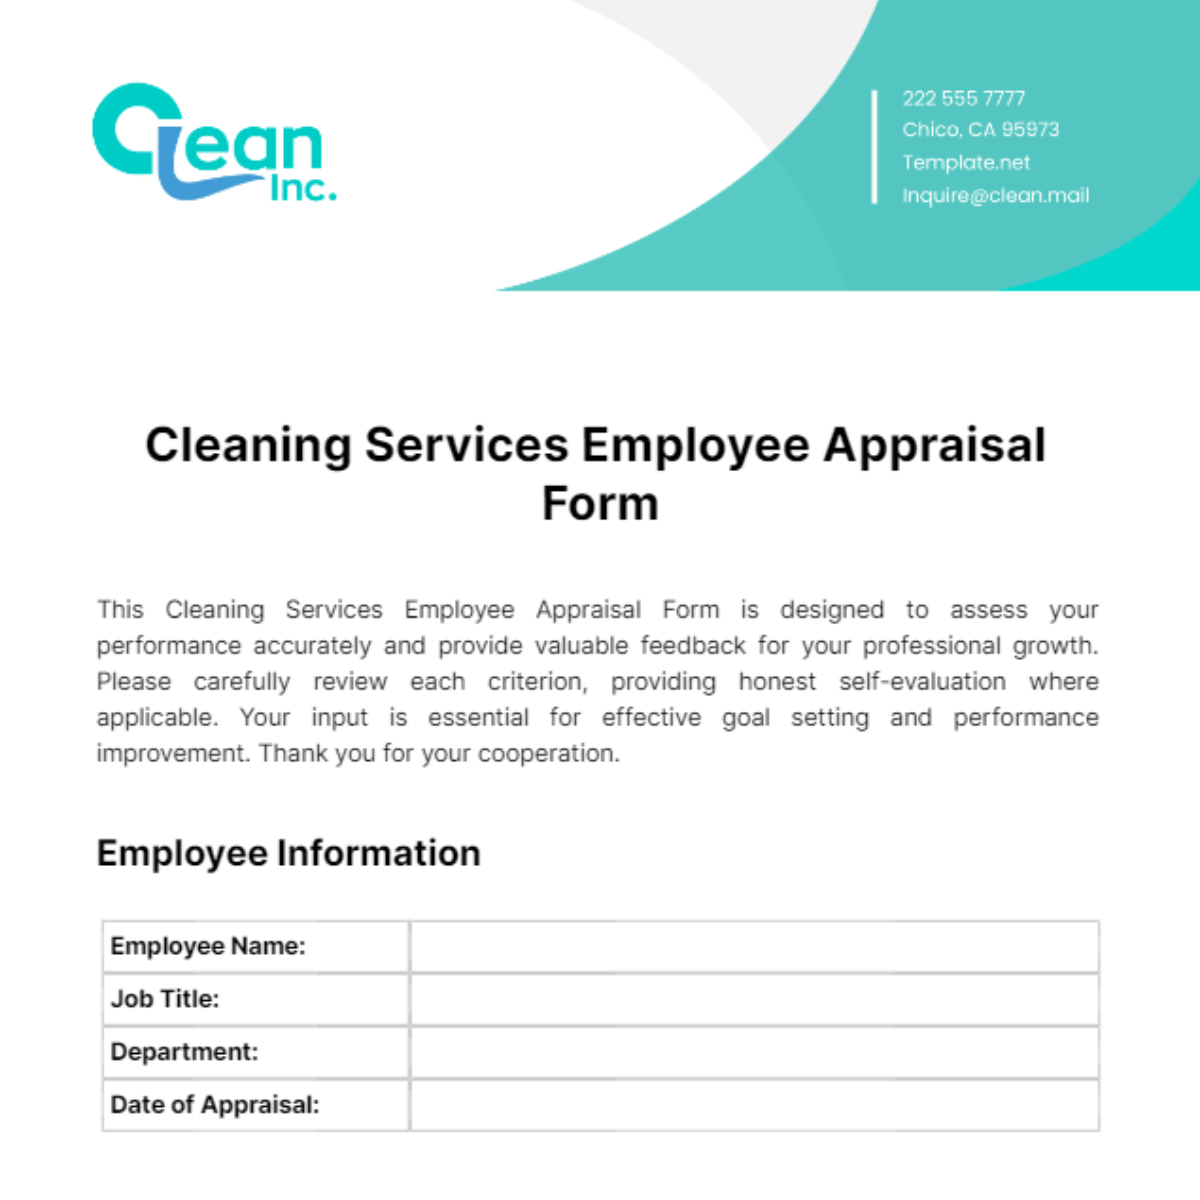 Cleaning Services Employee Appraisal Form Template